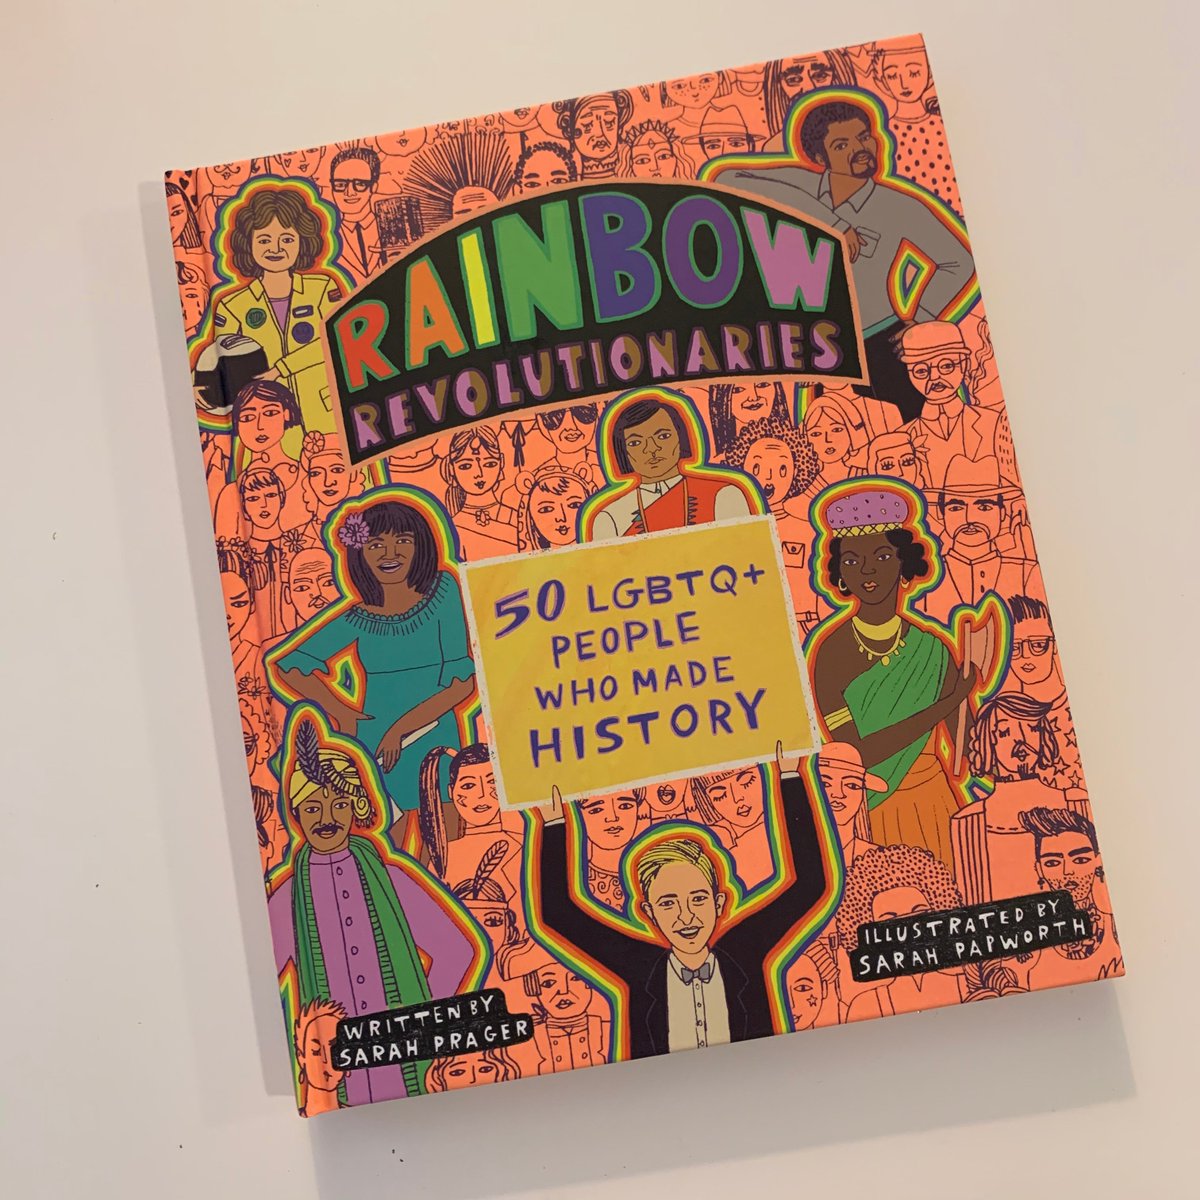 My new queer history book for ages 8+ comes out on May 26. My signings are canceled, bookstores are closed... This is a tough time for authors. In the hopes of catching your attention, here's a thread about this book I love so deeply.